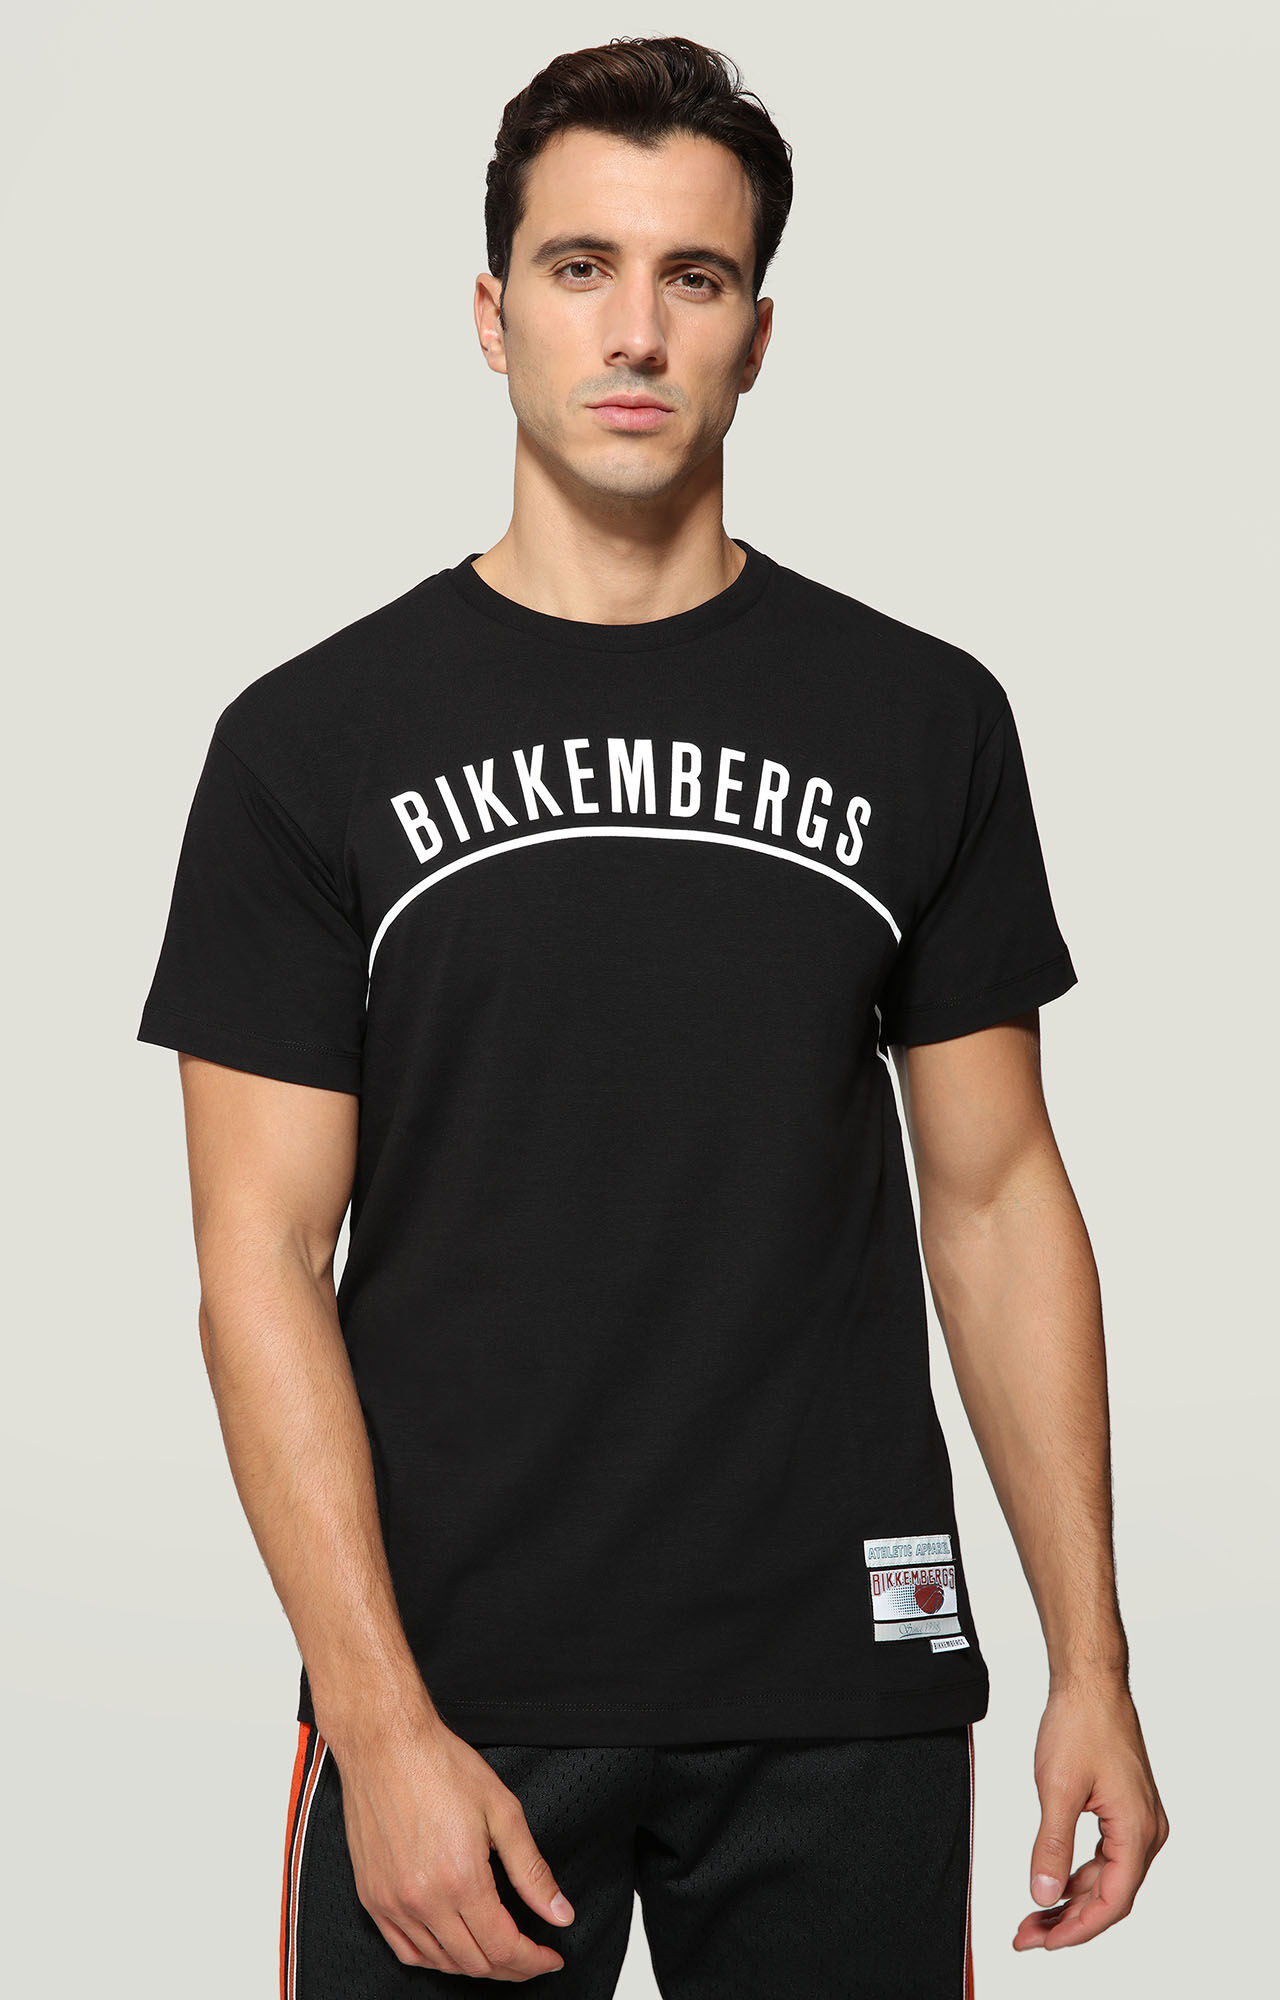 Bikkembergs T Shirt Top Sellers, UP TO 66% OFF | www 